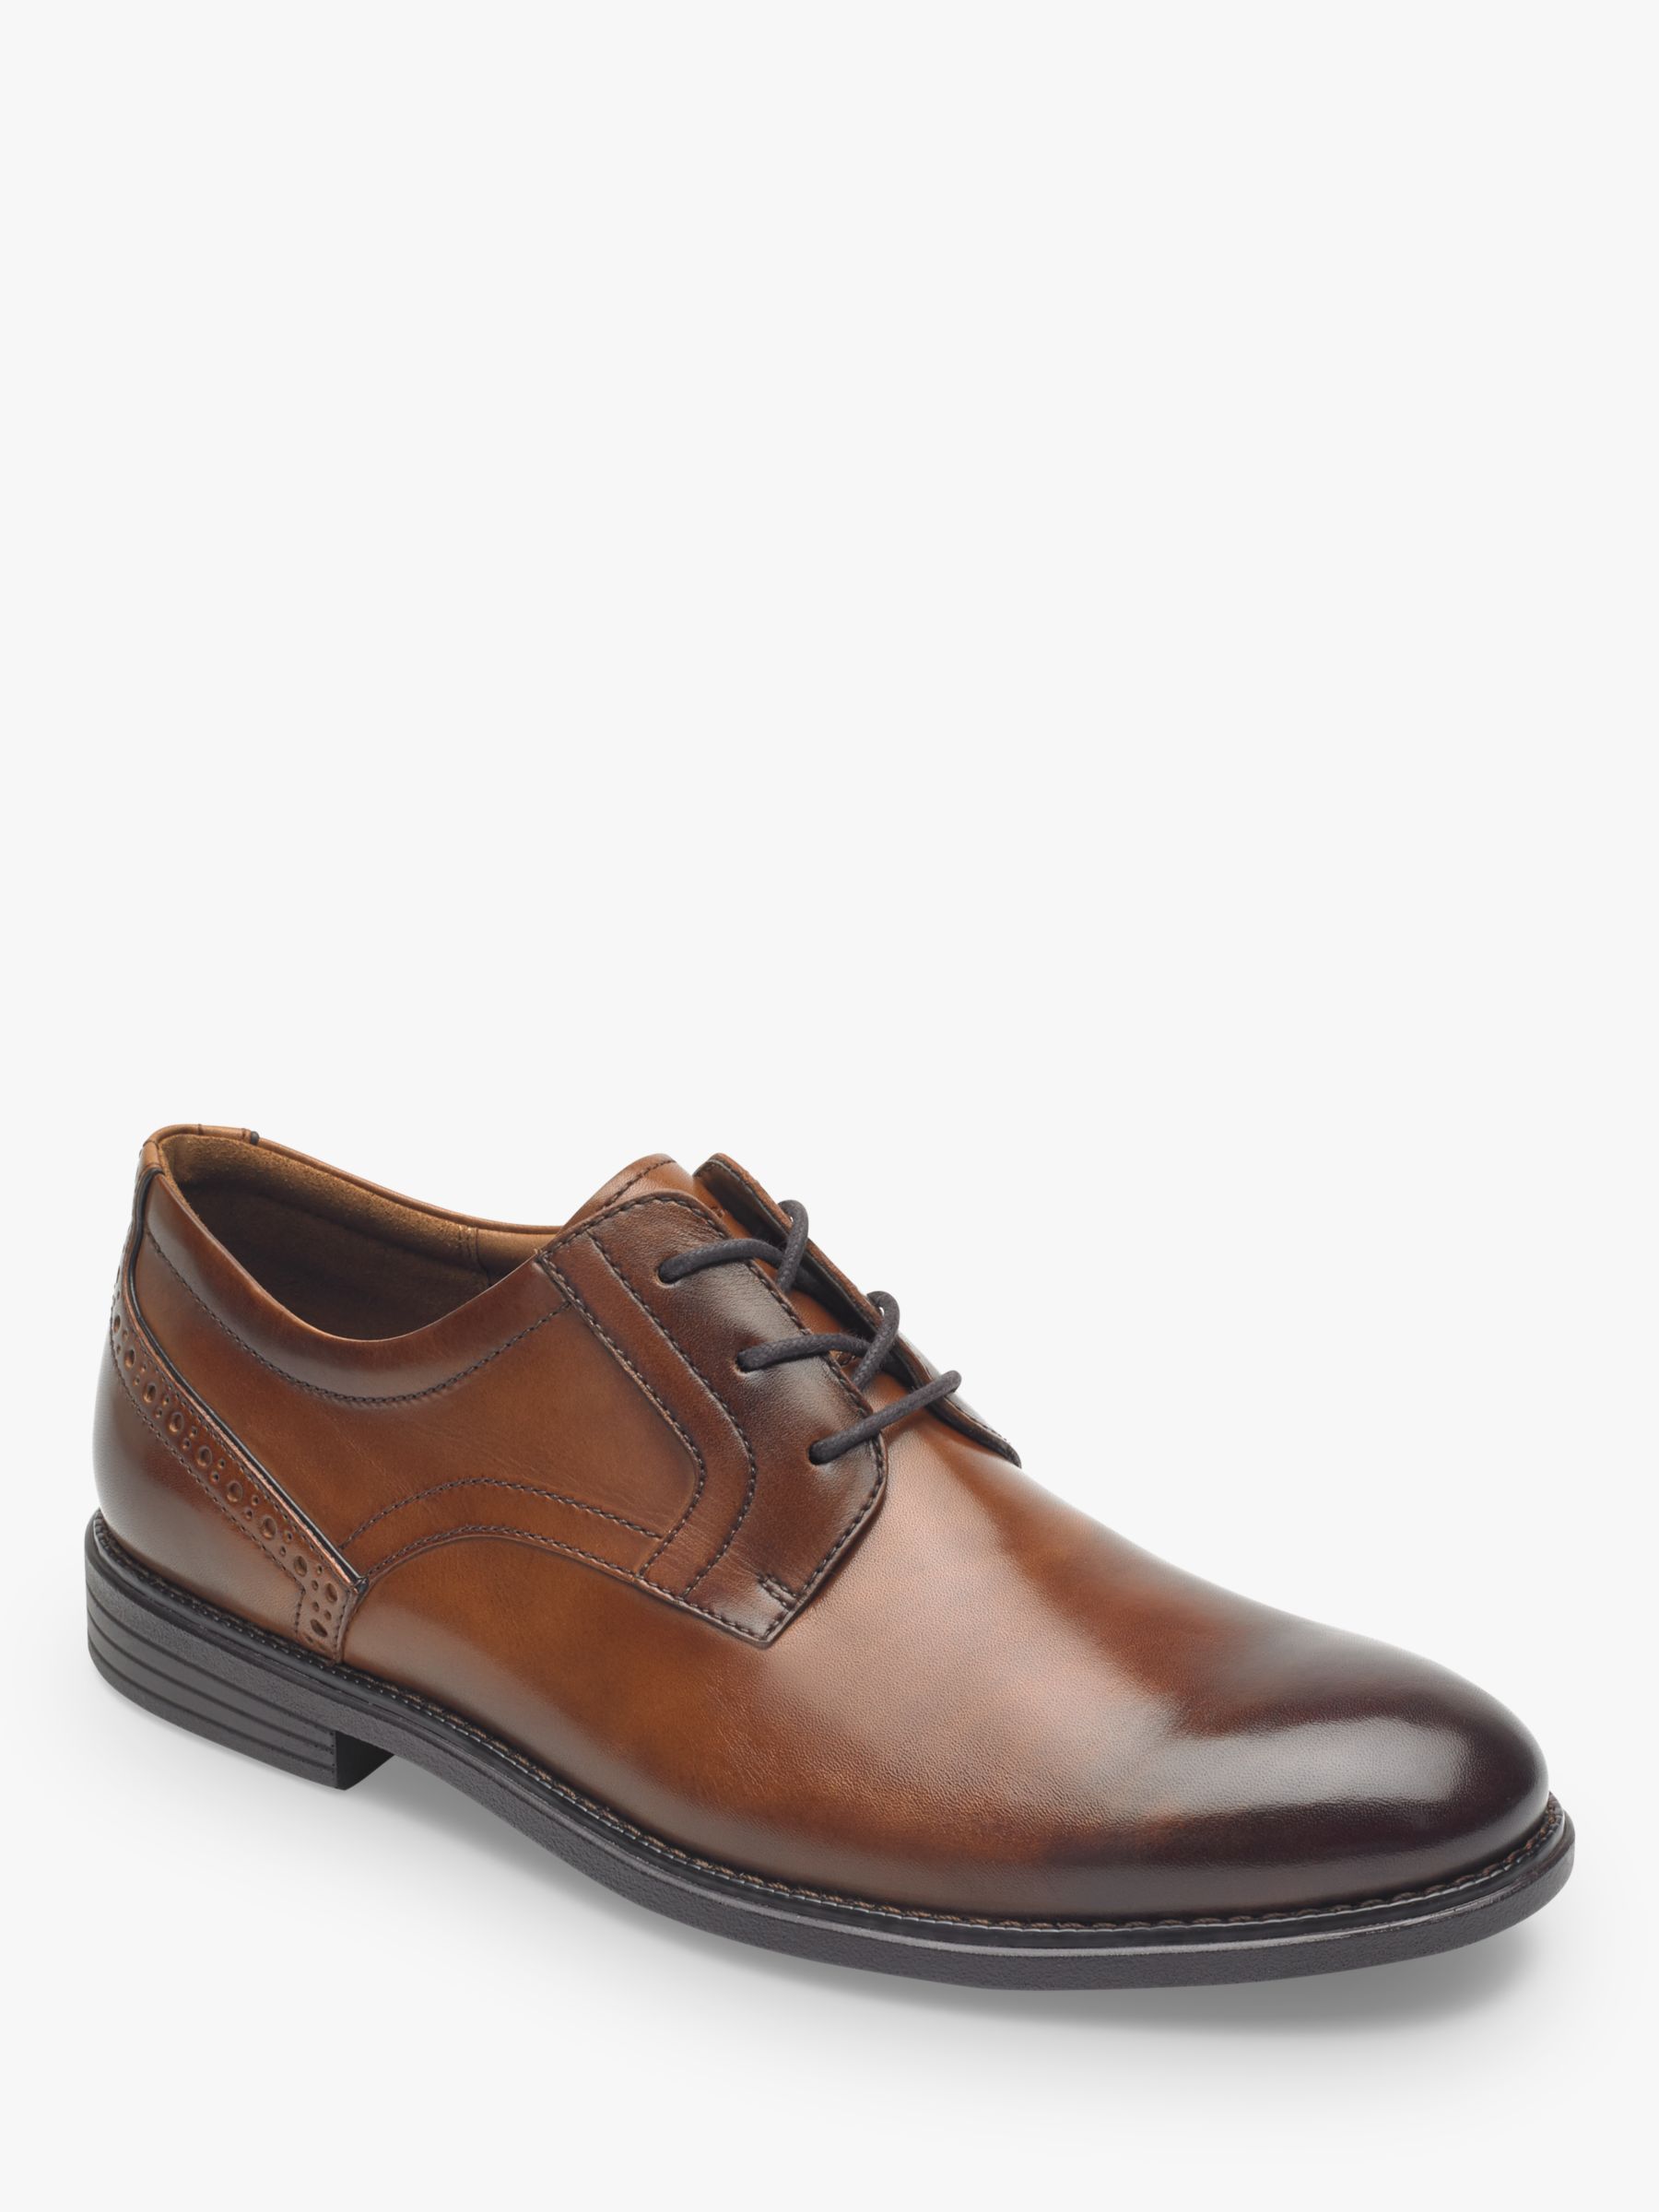 Rockport Madson Derby Leather Shoes 